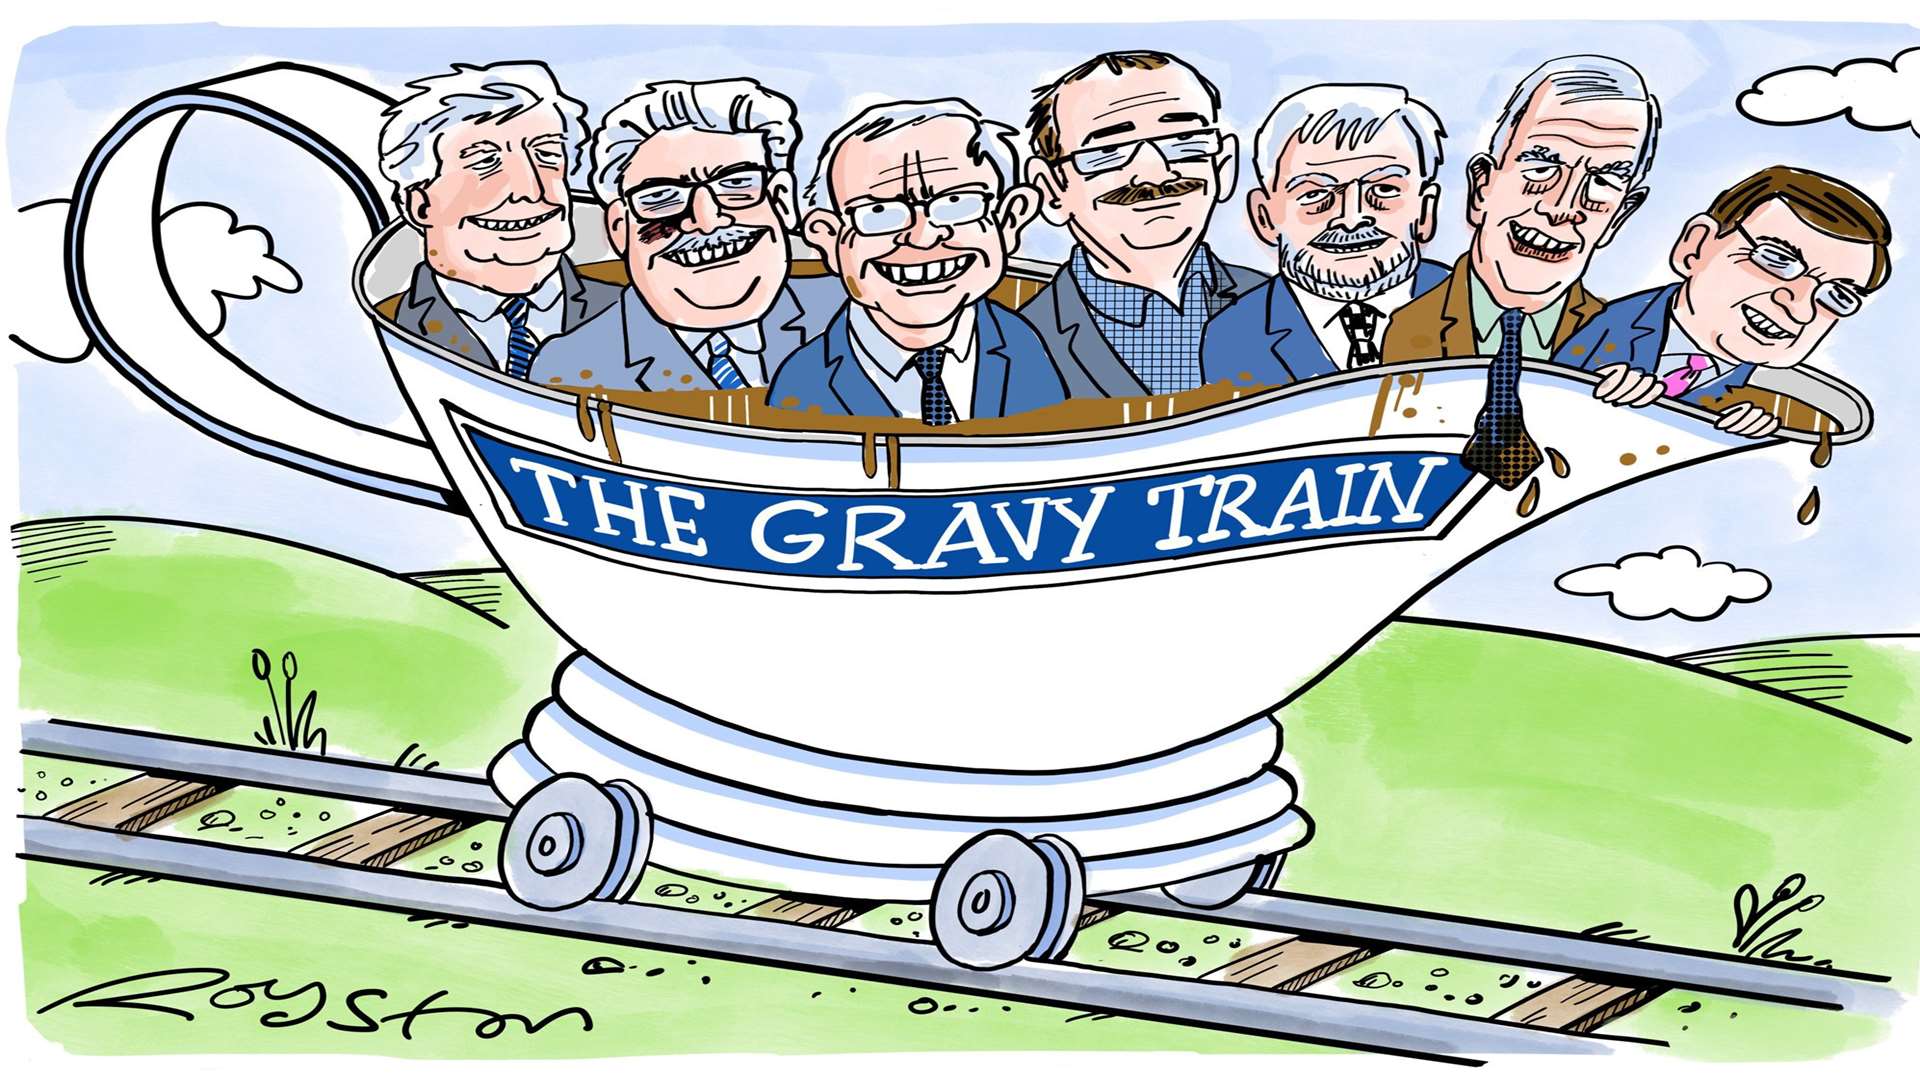 Gravy train, anyone? Cartoonist Royston offers his take on the KCC allowance controversy.